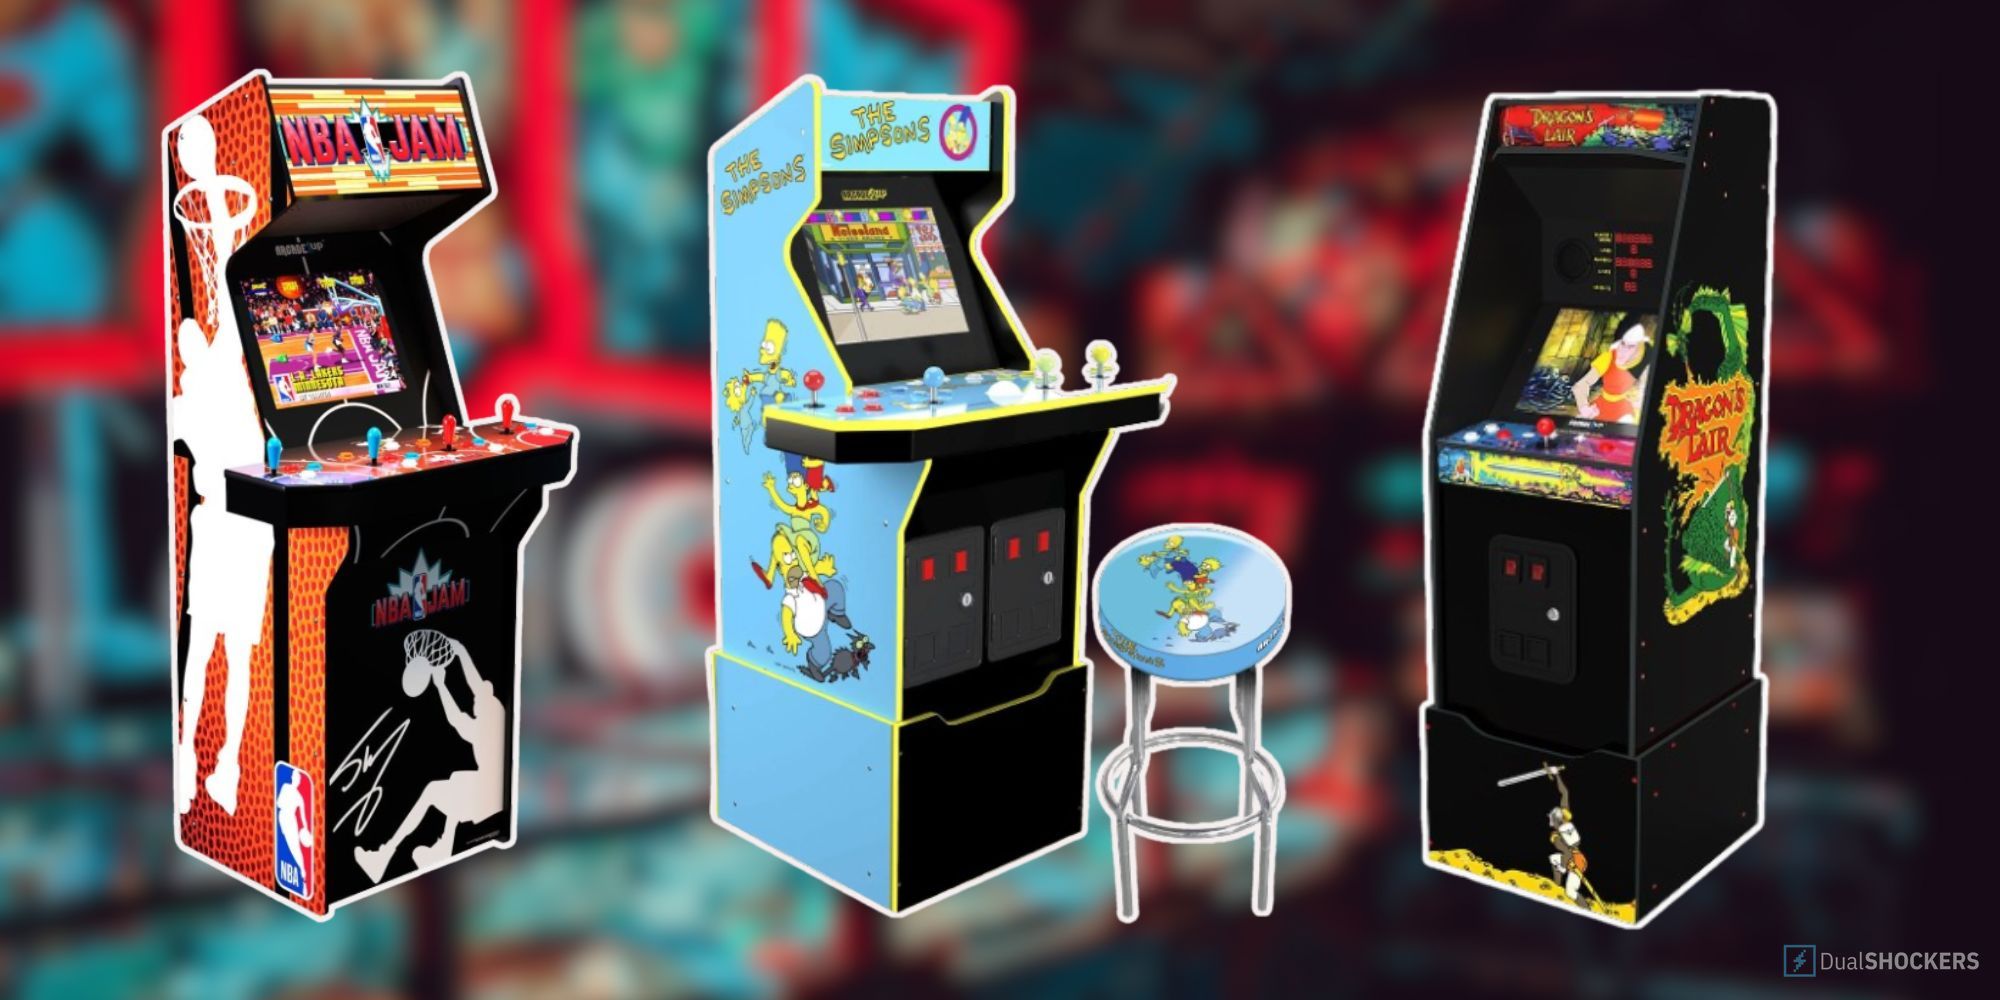 Feature image with blurry arcade background and the Arcade1Up Gaming Cabinets NBA Jam, The Simpsons, Dragon's Lair gaming cabinets in the front.